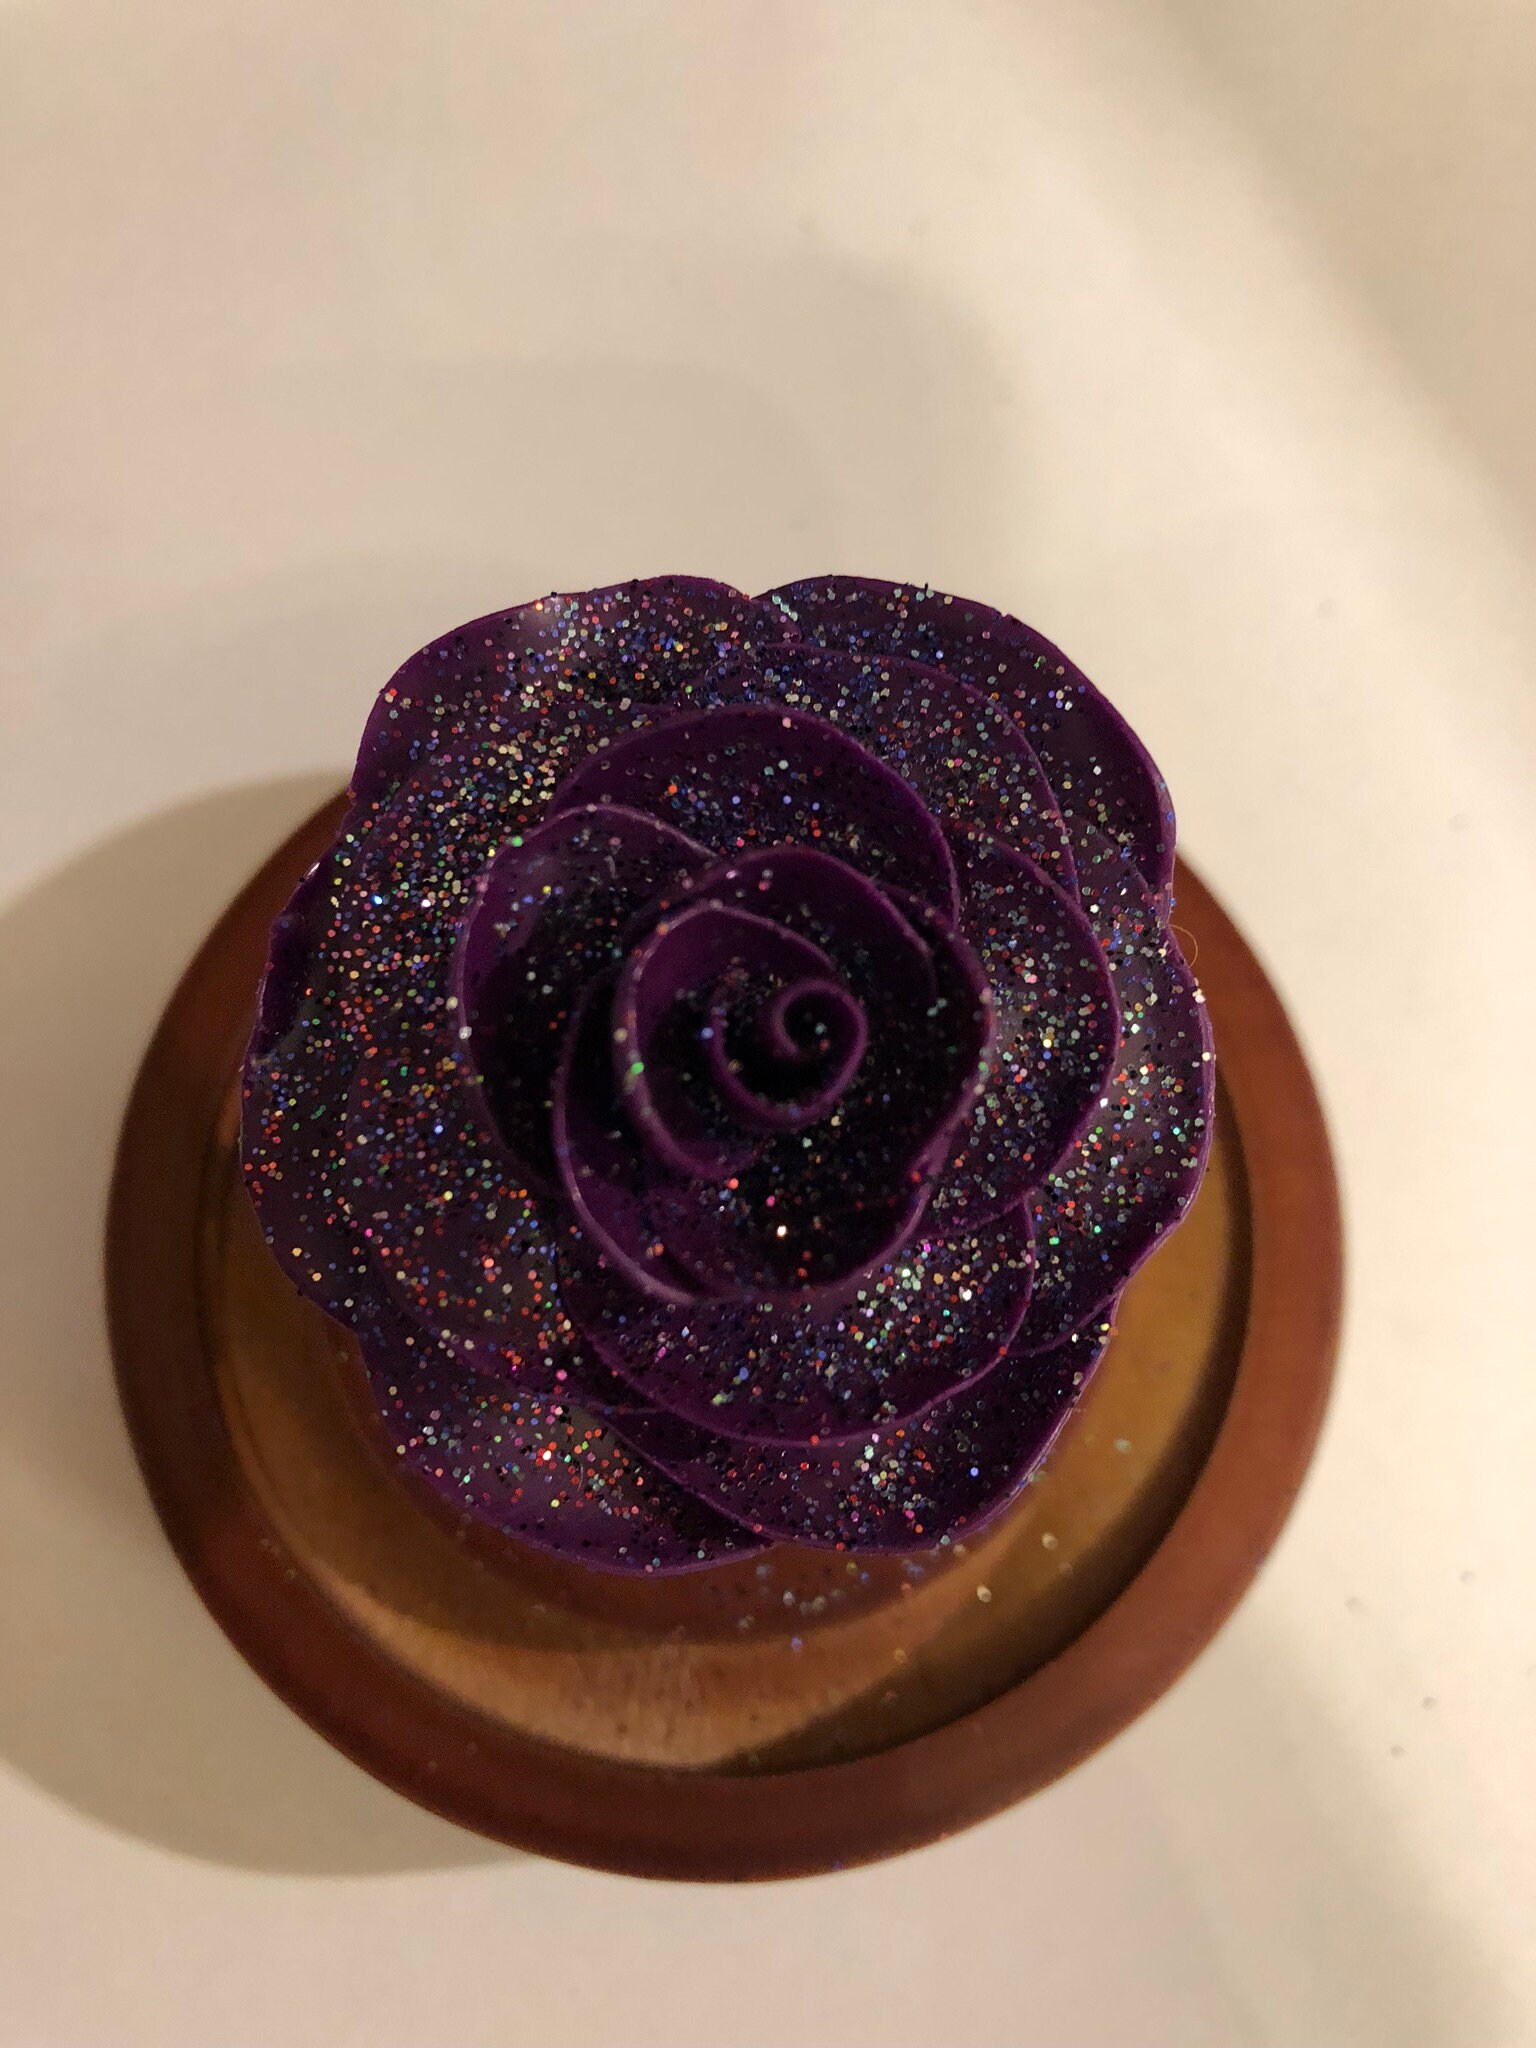 Purple Galaxy Rose, Beauty and the Beast Rose, Enchanted Rose, Purple Rose  With Glitter in a Glass Dome, Large Glass Dome Rose, Magic Rose 